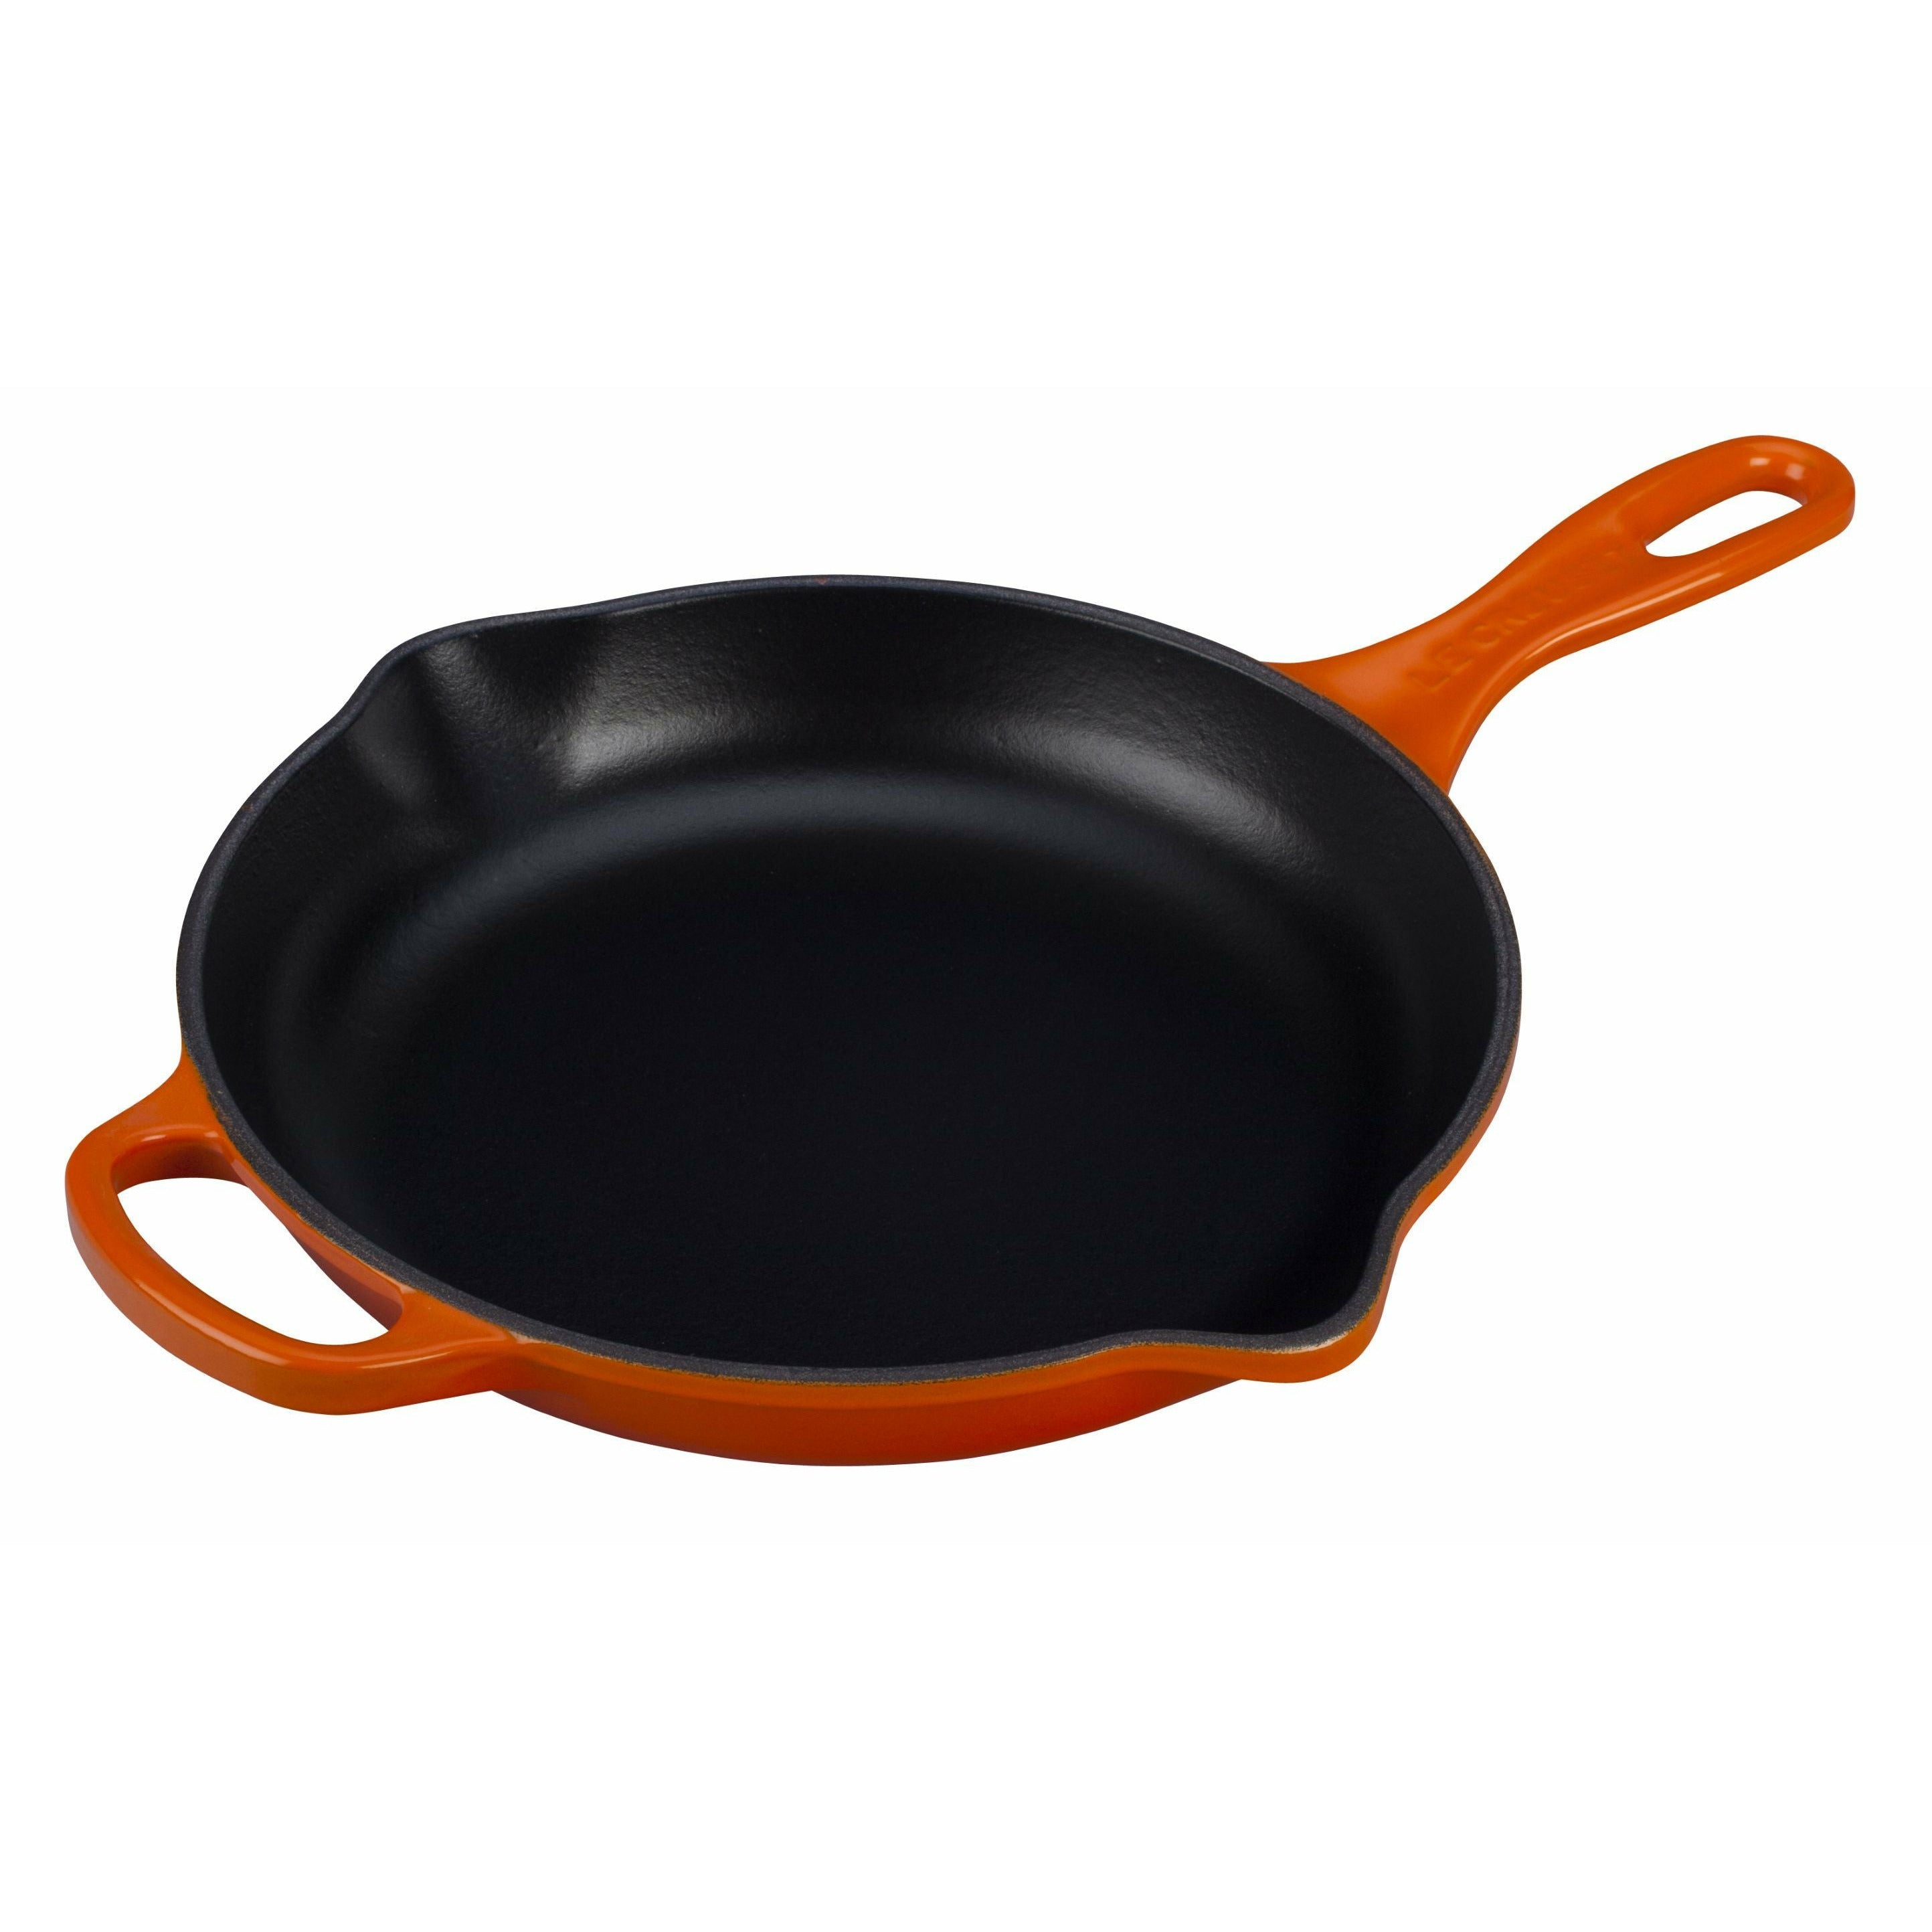 Le Creuset Signatur Round Frying and Servering Pan 20 cm, Ovn Red